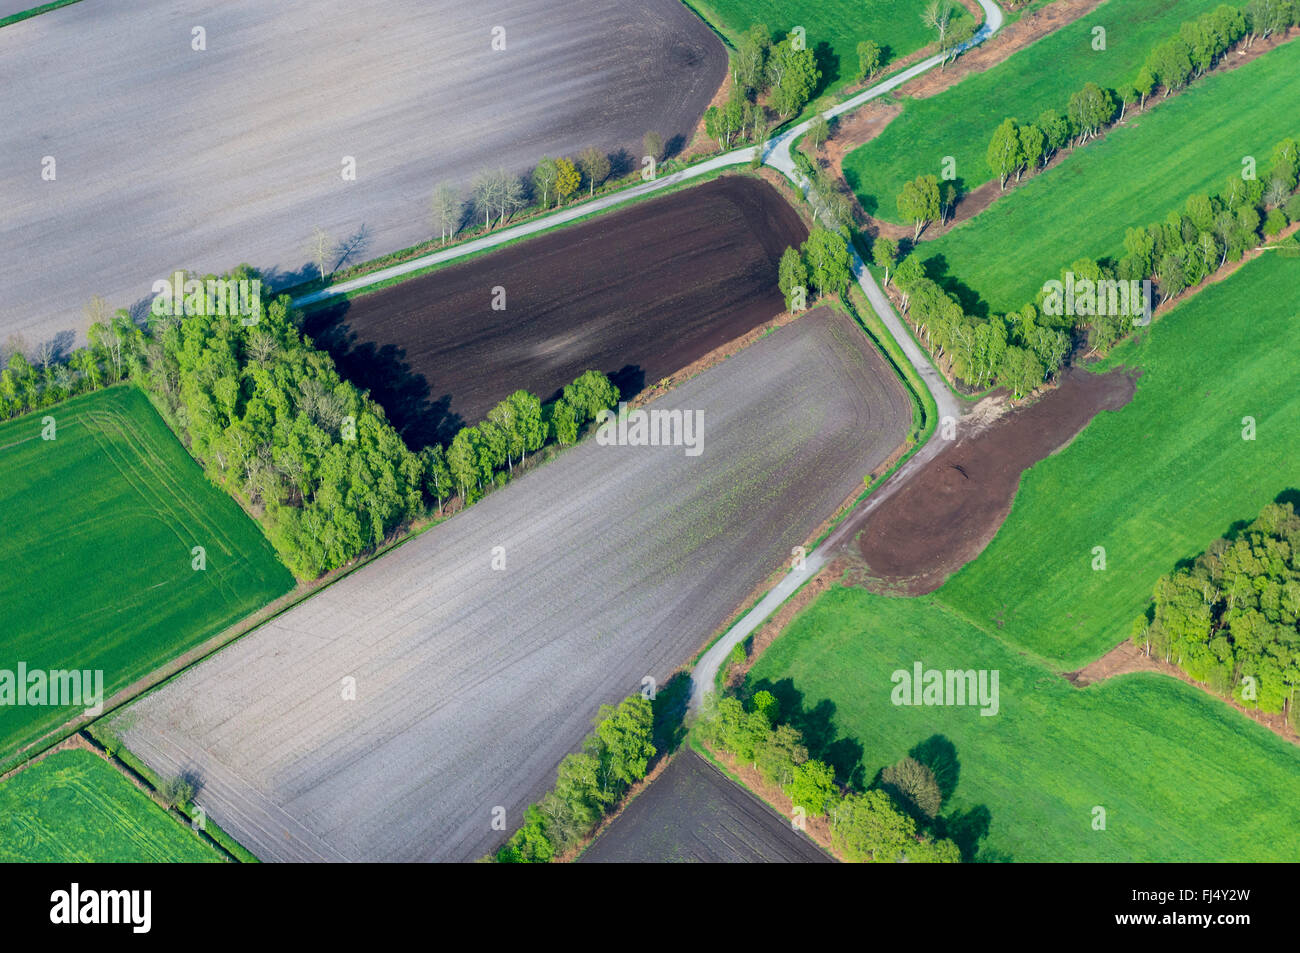 cultural landscape at Suedlohne, aerial view, Germany, Lower Saxony, Oldenburger Muensterland, Lohne Stock Photo